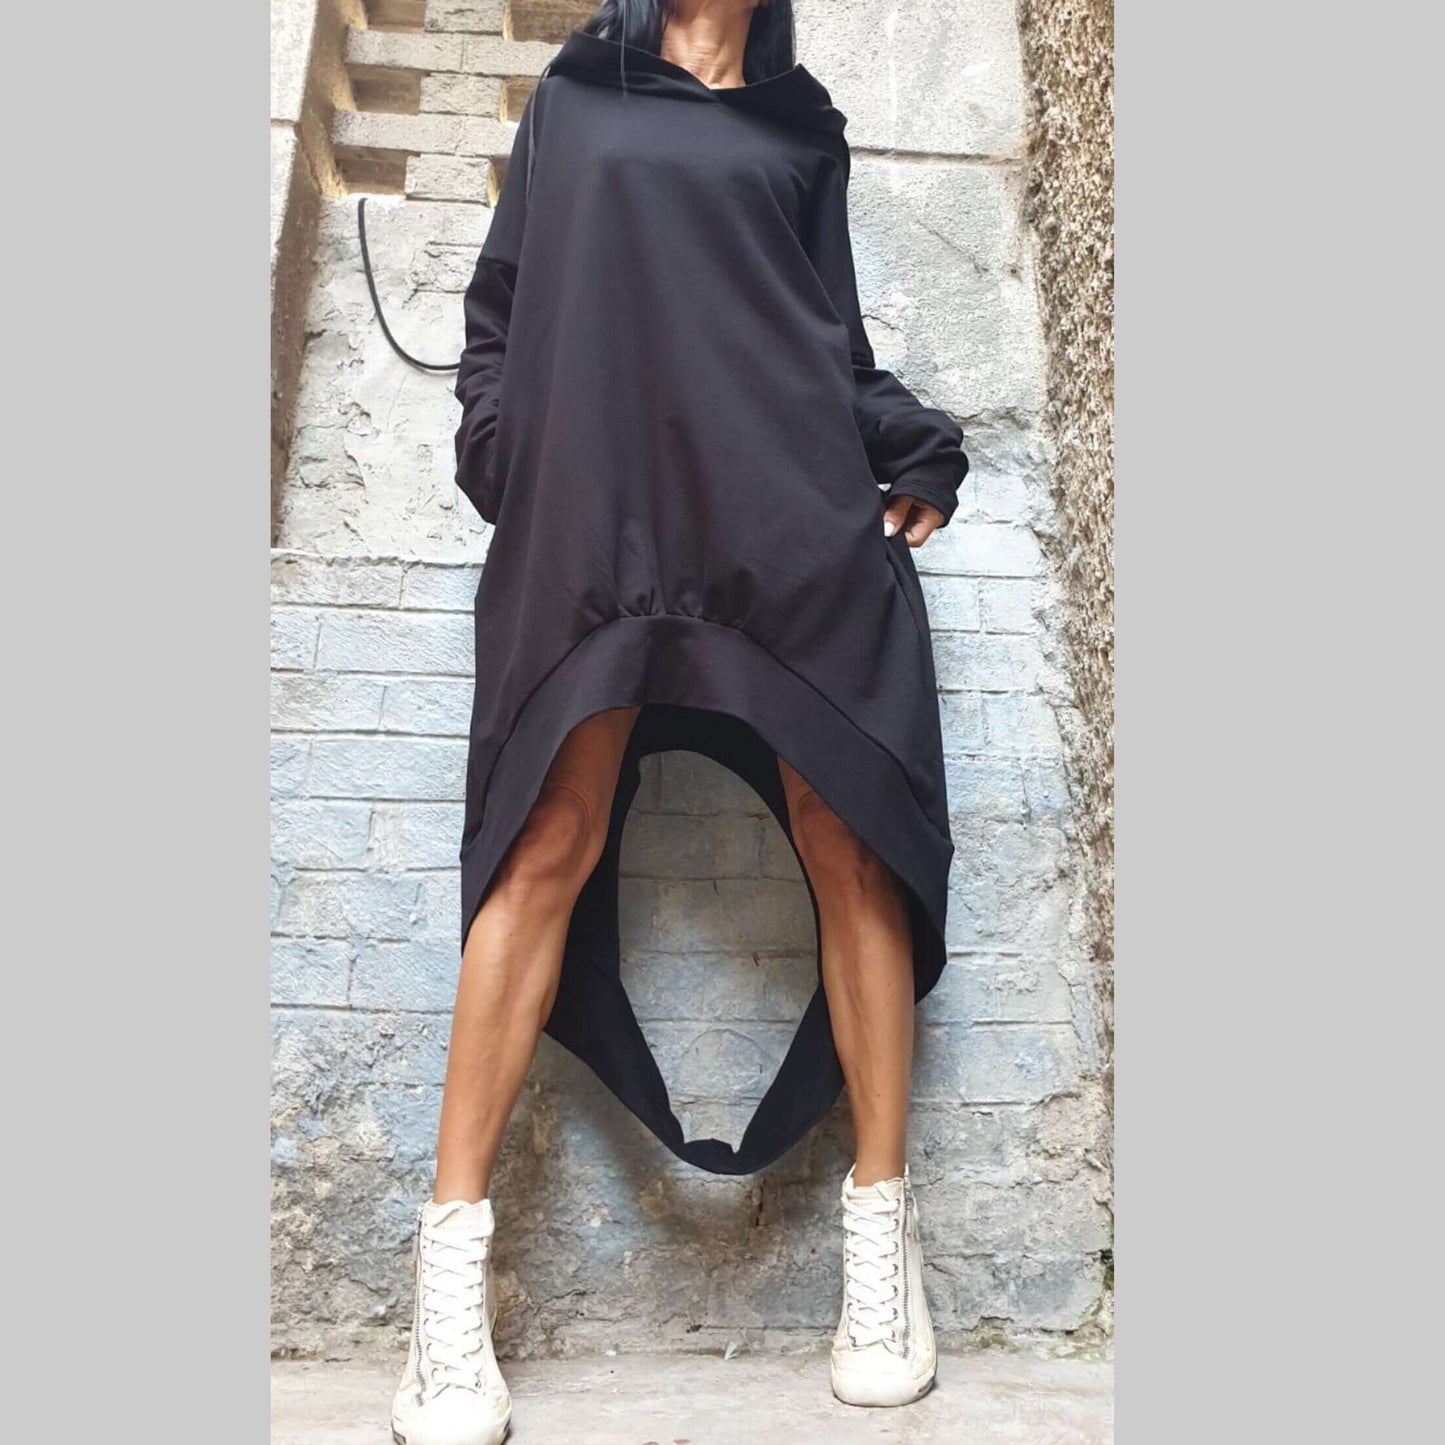 Extravagant Hooded Tunic - Handmade clothing from AngelBySilvia - Top Designer Brands 